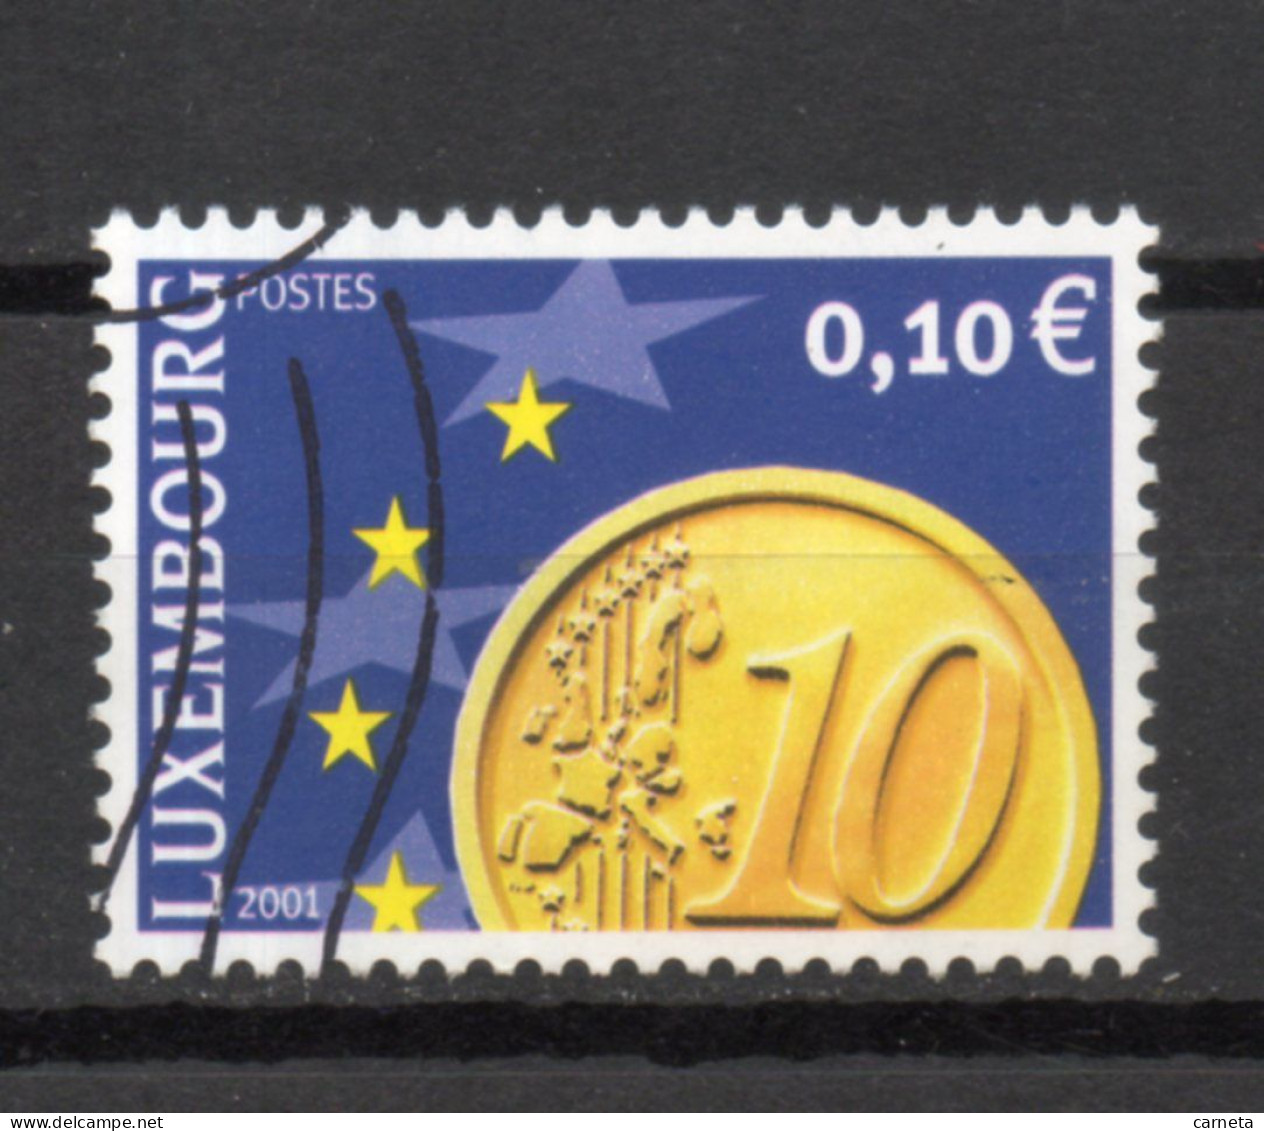 LUXEMBOURG    N° 1498     OBLITERE   COTE 0.20€    MONNAIE EURO - Used Stamps